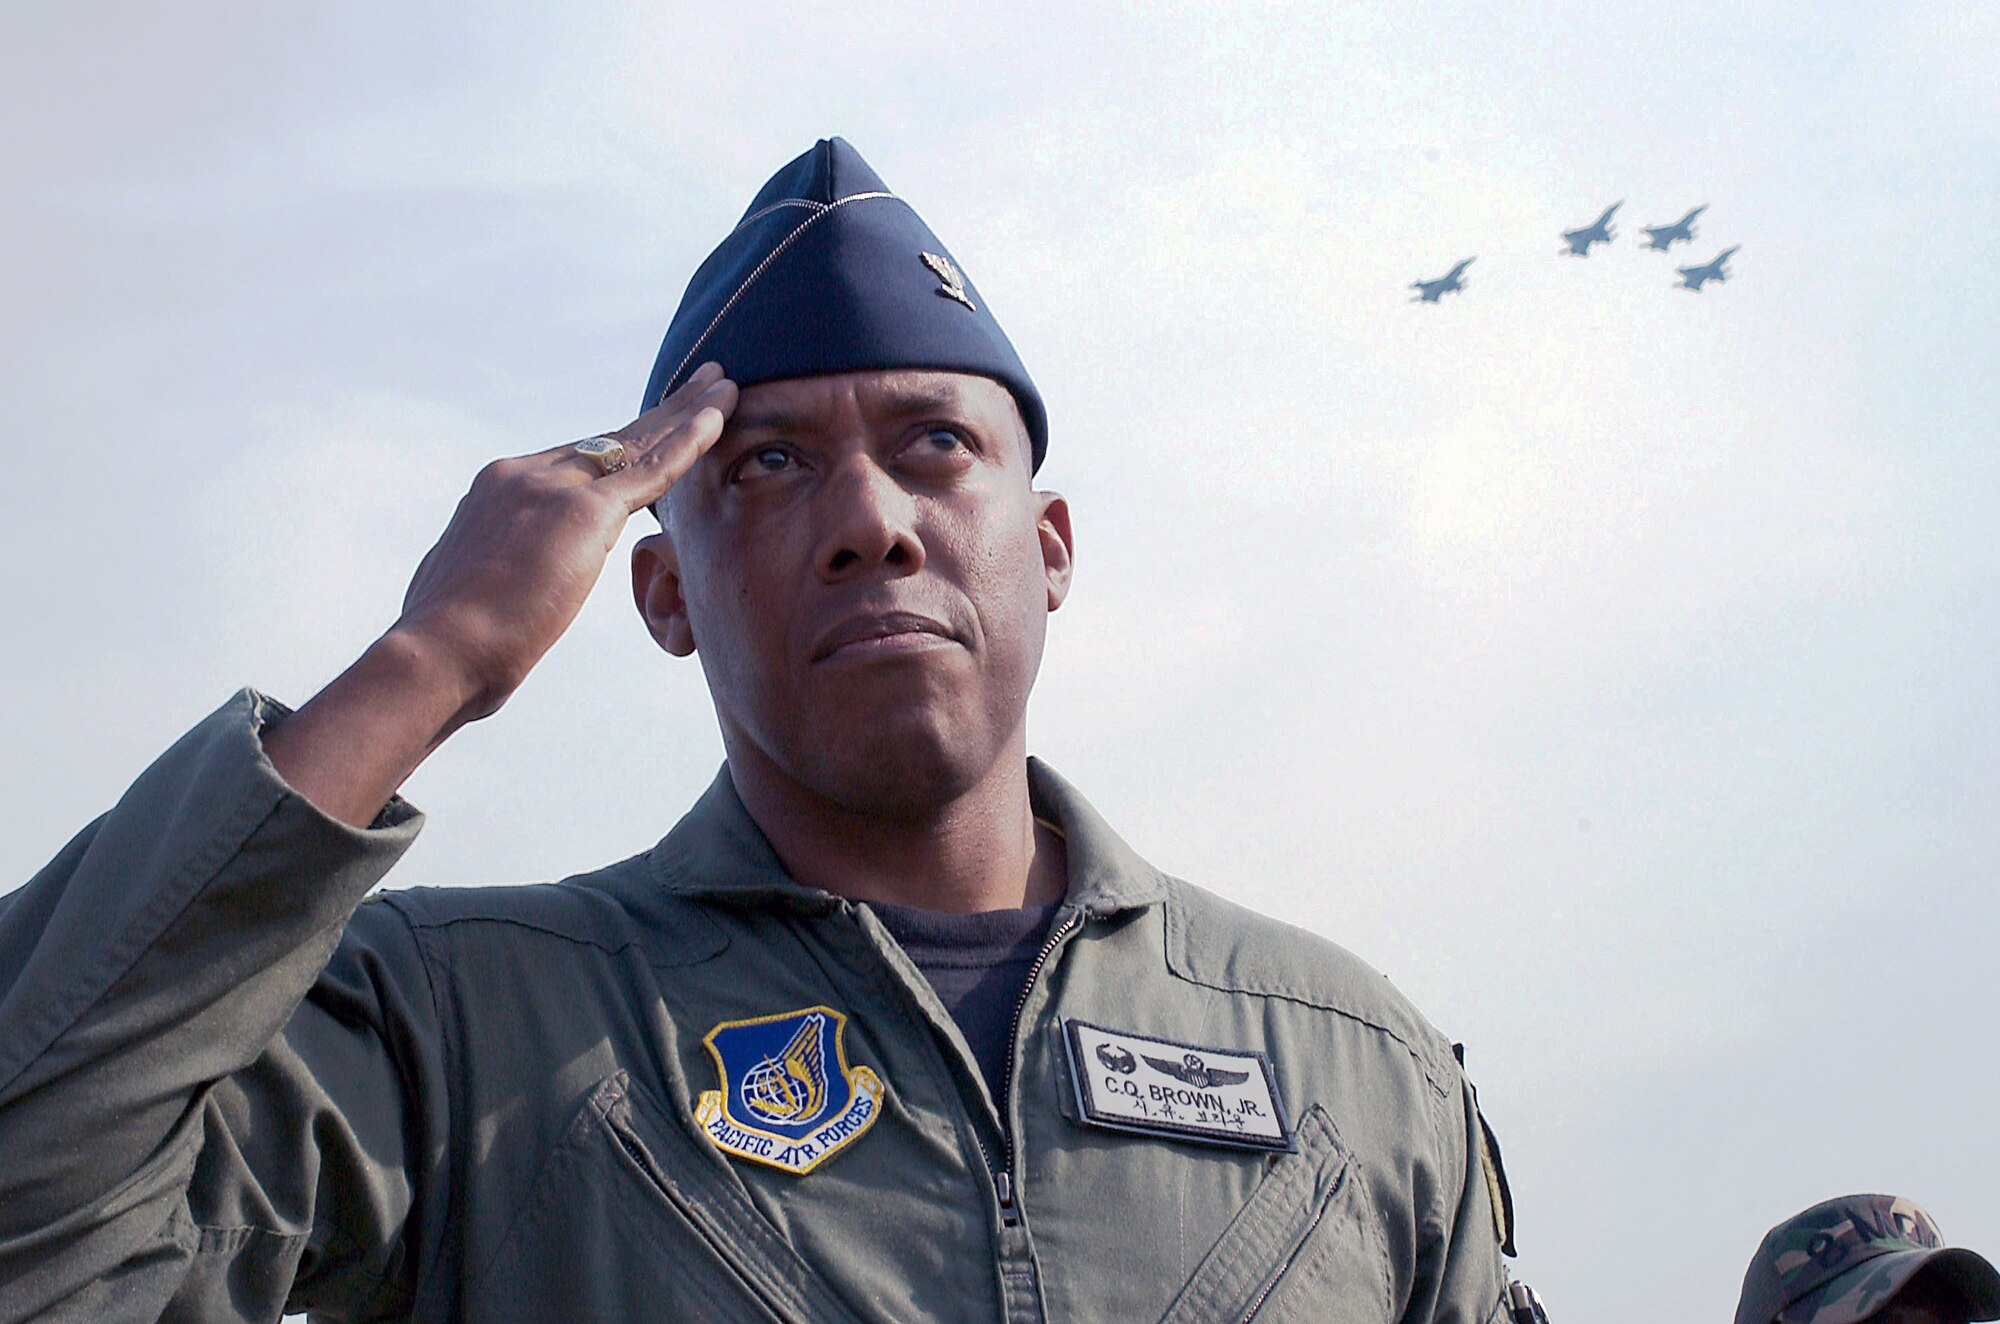 Col. C. Q. Brown, 8th Fighter Wing commander, salutes during a commemoration at Kunsan Air Base, South Korea, June 19 as a missing man formation, flown by members of the wing, passes by overhead.  The ceremony was to honor the memory of Brig. Gen. Robin Olds, who passed away recently. General Olds was a triple ace fighter pilot in World War II and Vietnam and a former commander of the then 8th Tactical Fighter Wing at Kunsan.  (U.S. Air Force Photo/Senior Airman Barry Loo)